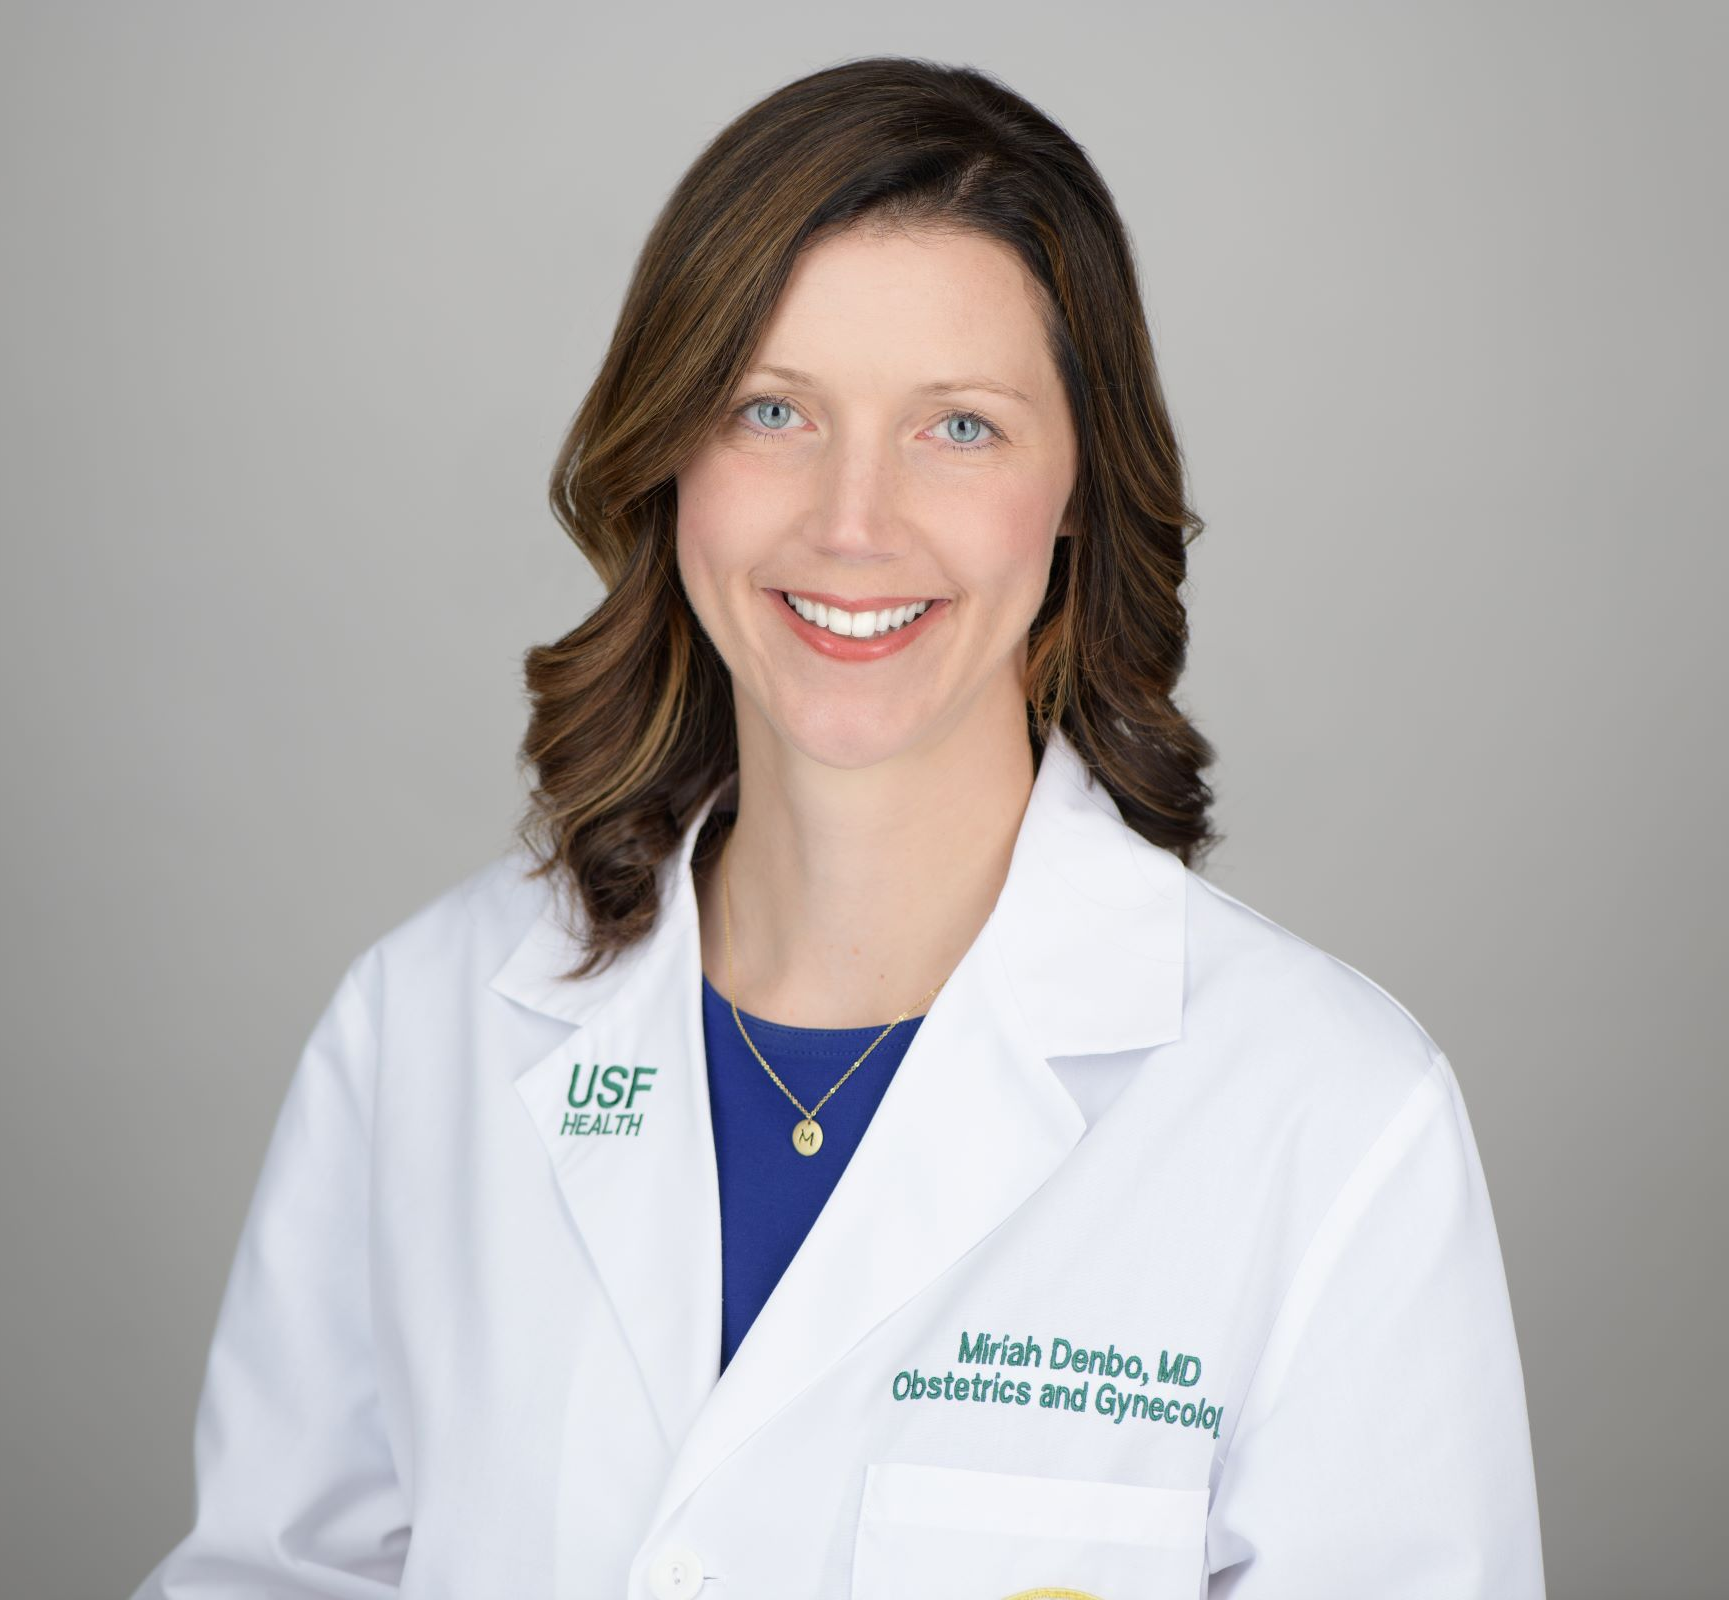 Profile Picture of Miriah Denbo, MD, FACOG